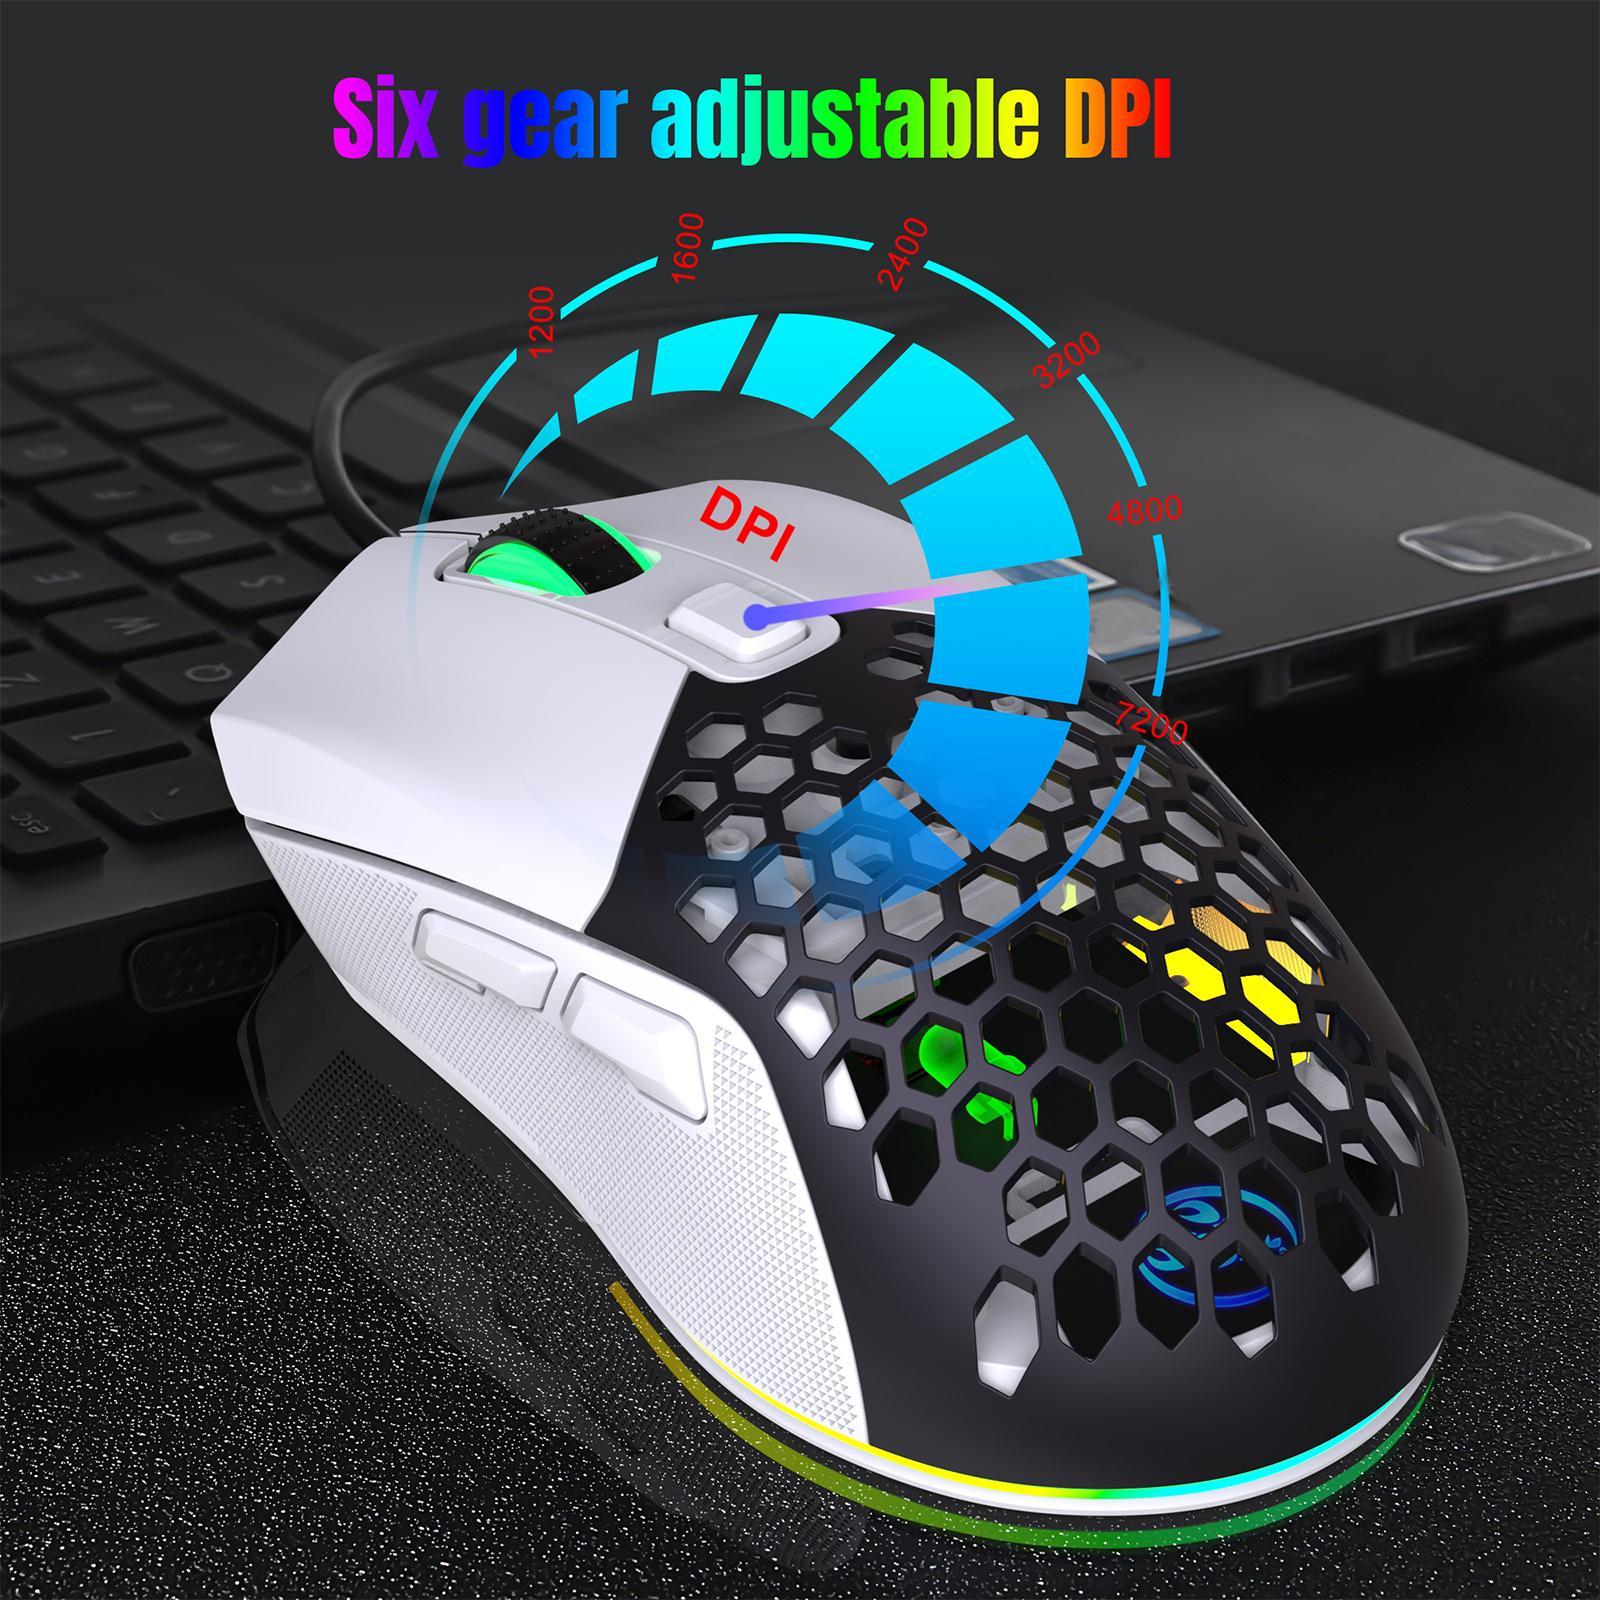 Wired Gaming Mouse Colorful LED Lights Ergonomic for Laptop Notebook PC